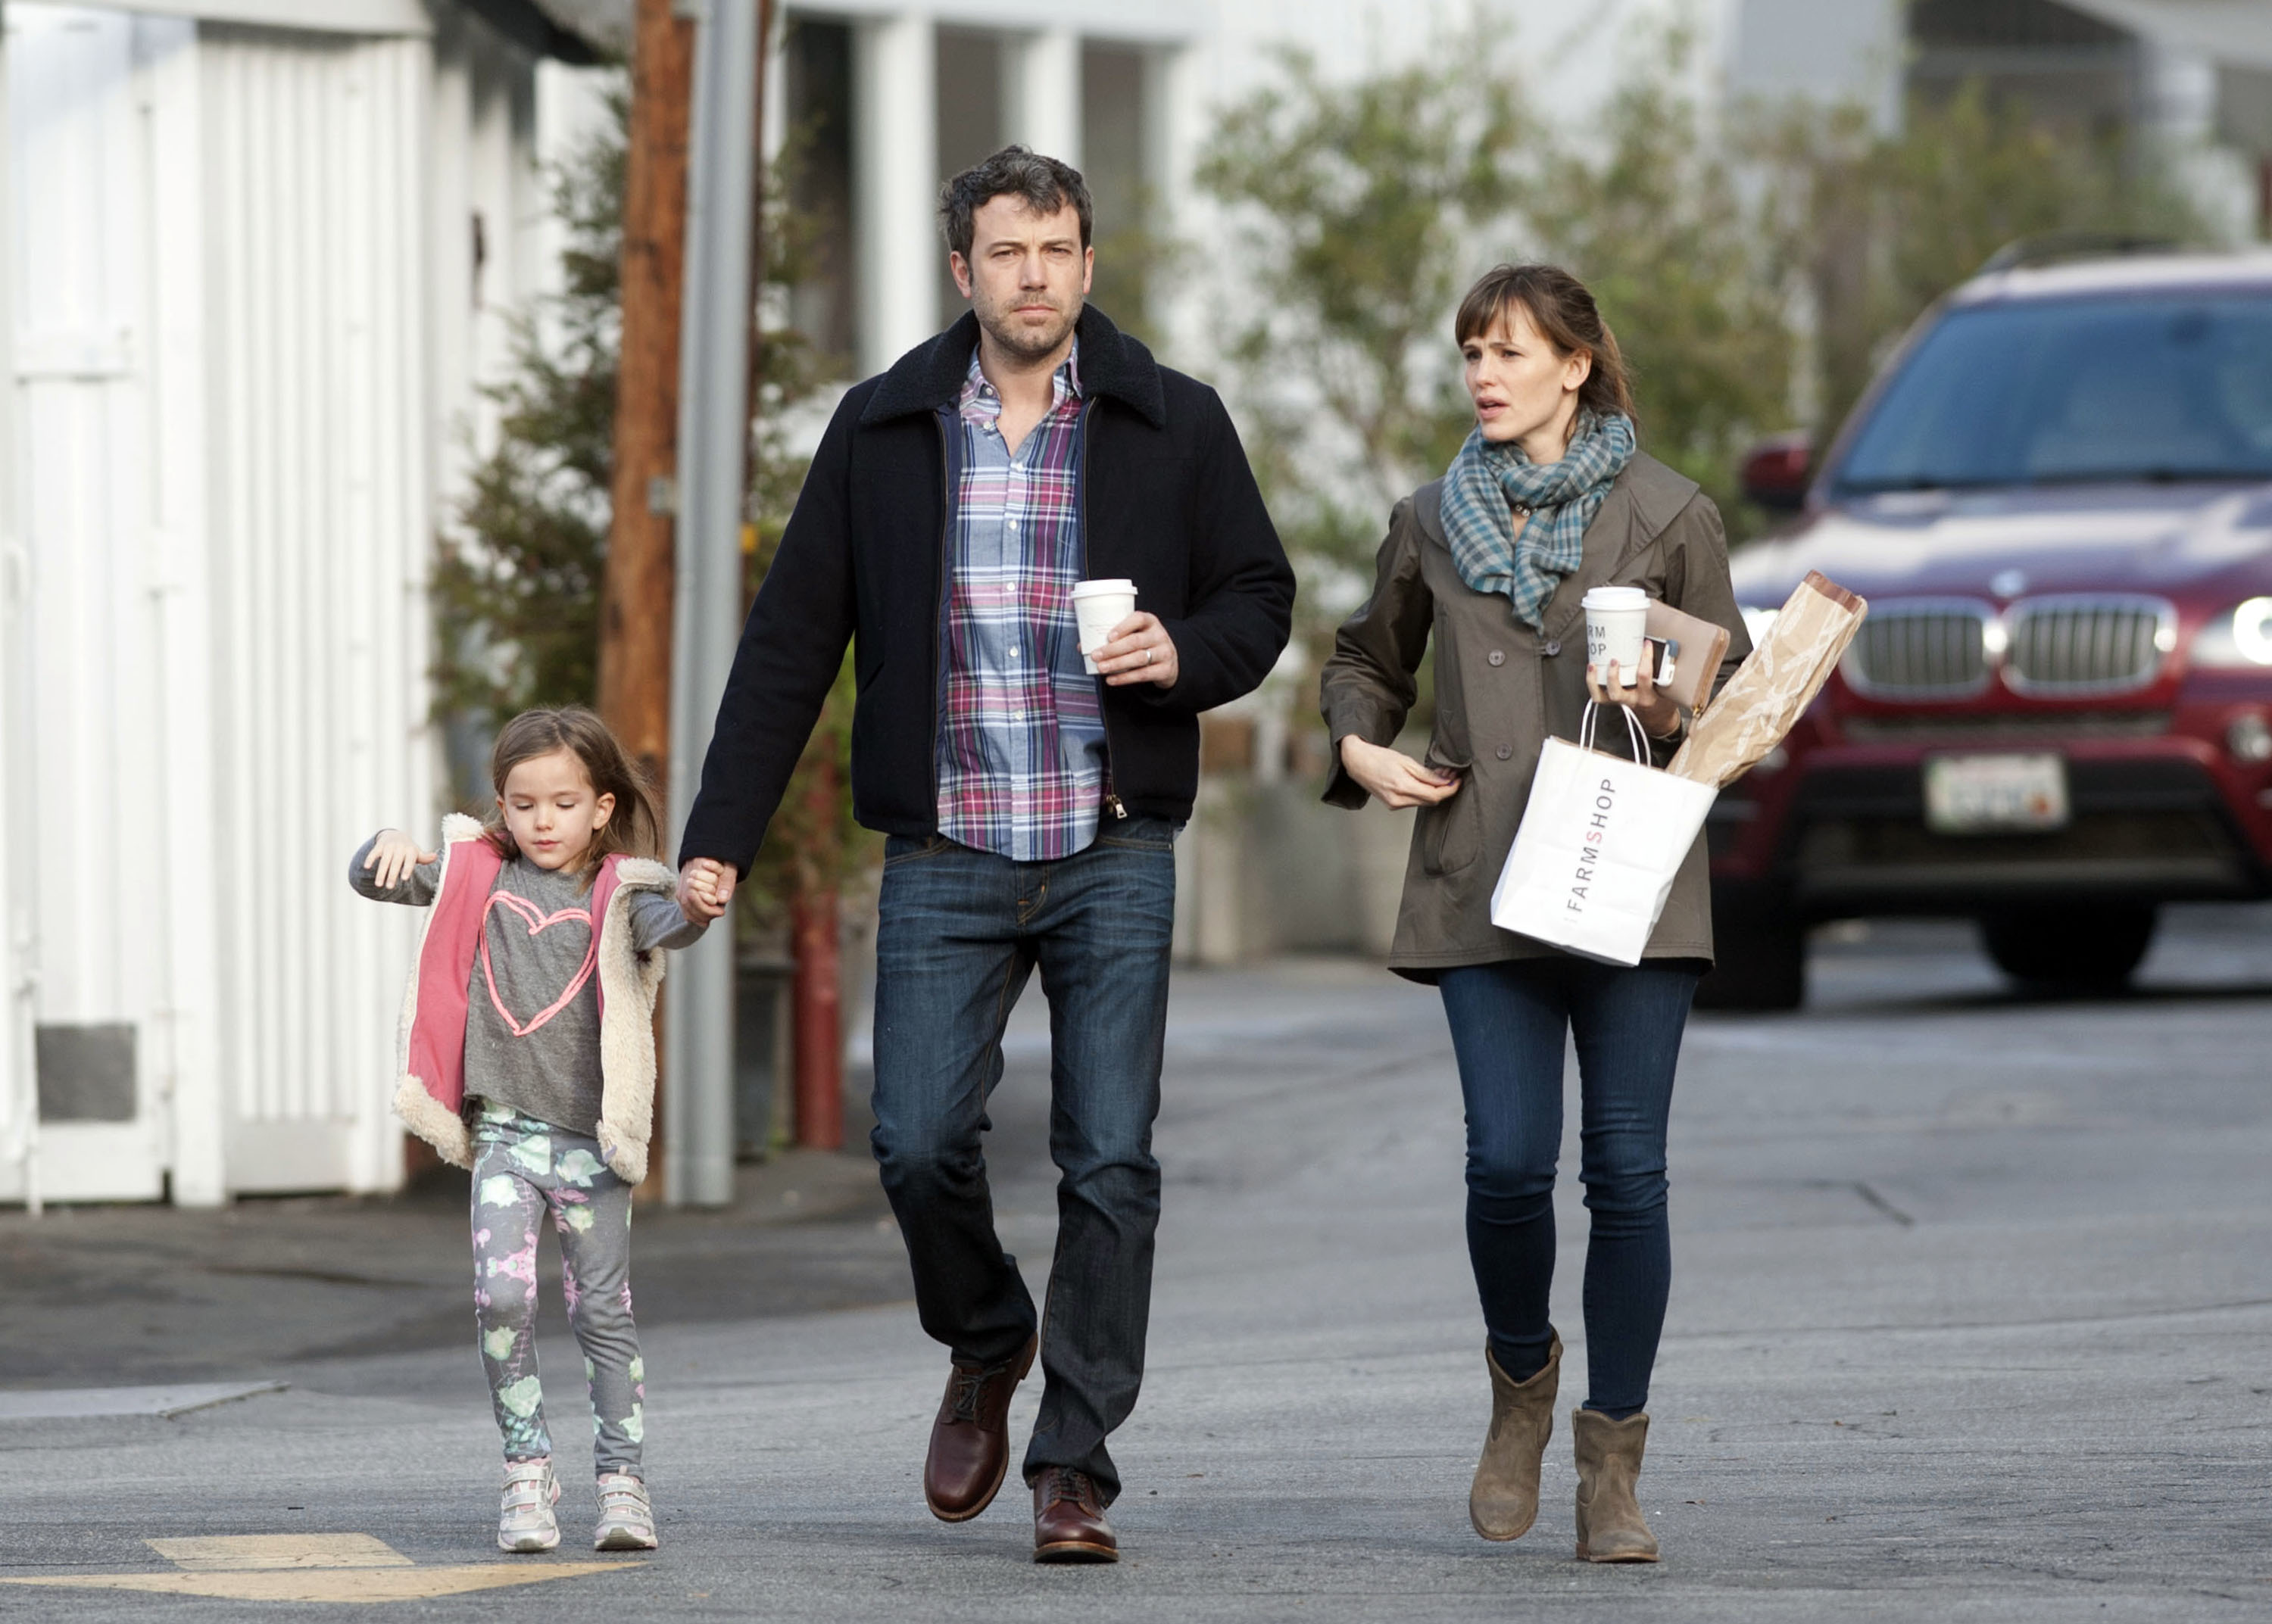 Ben Affleck and Jennifer Garner are seen with their daughter, Seraphina Affleck on February 6, 2014, in Los Angeles, California. | Source: Getty Images